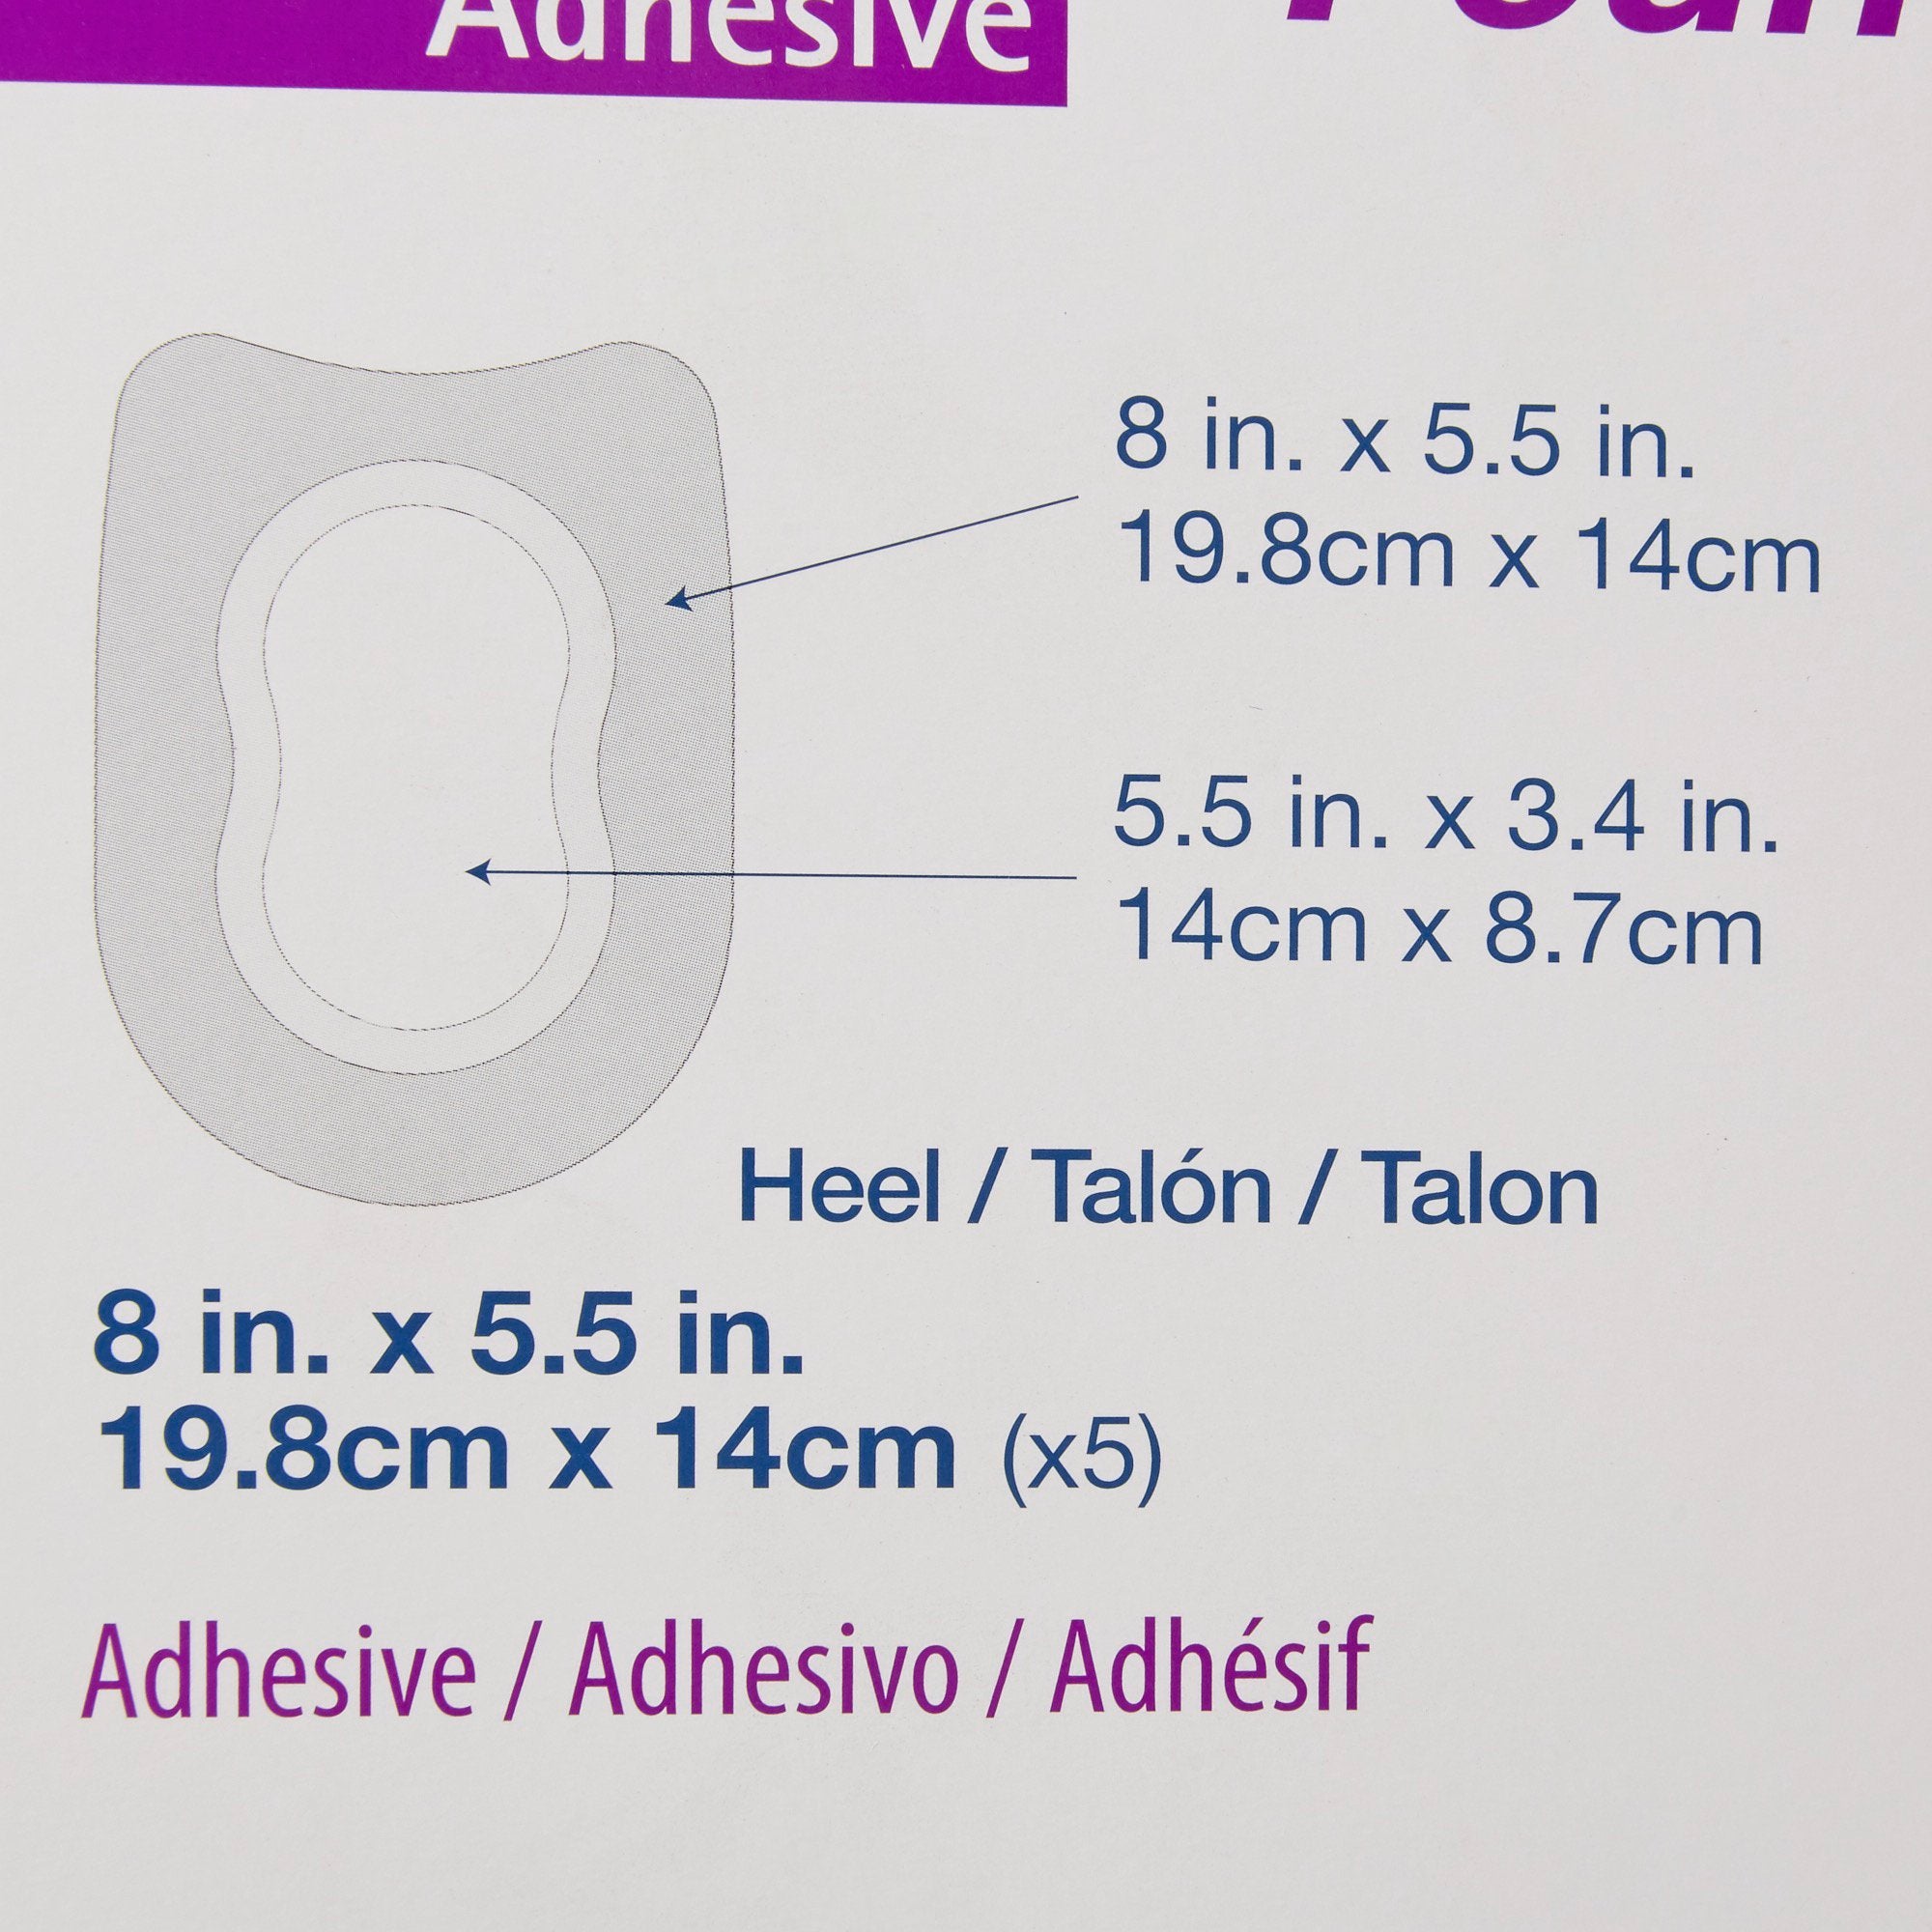 Foam Dressing Aquacel 5-1/2 X 8 Inch With Border Film Backing Silicone Adhesive Heel Sterile